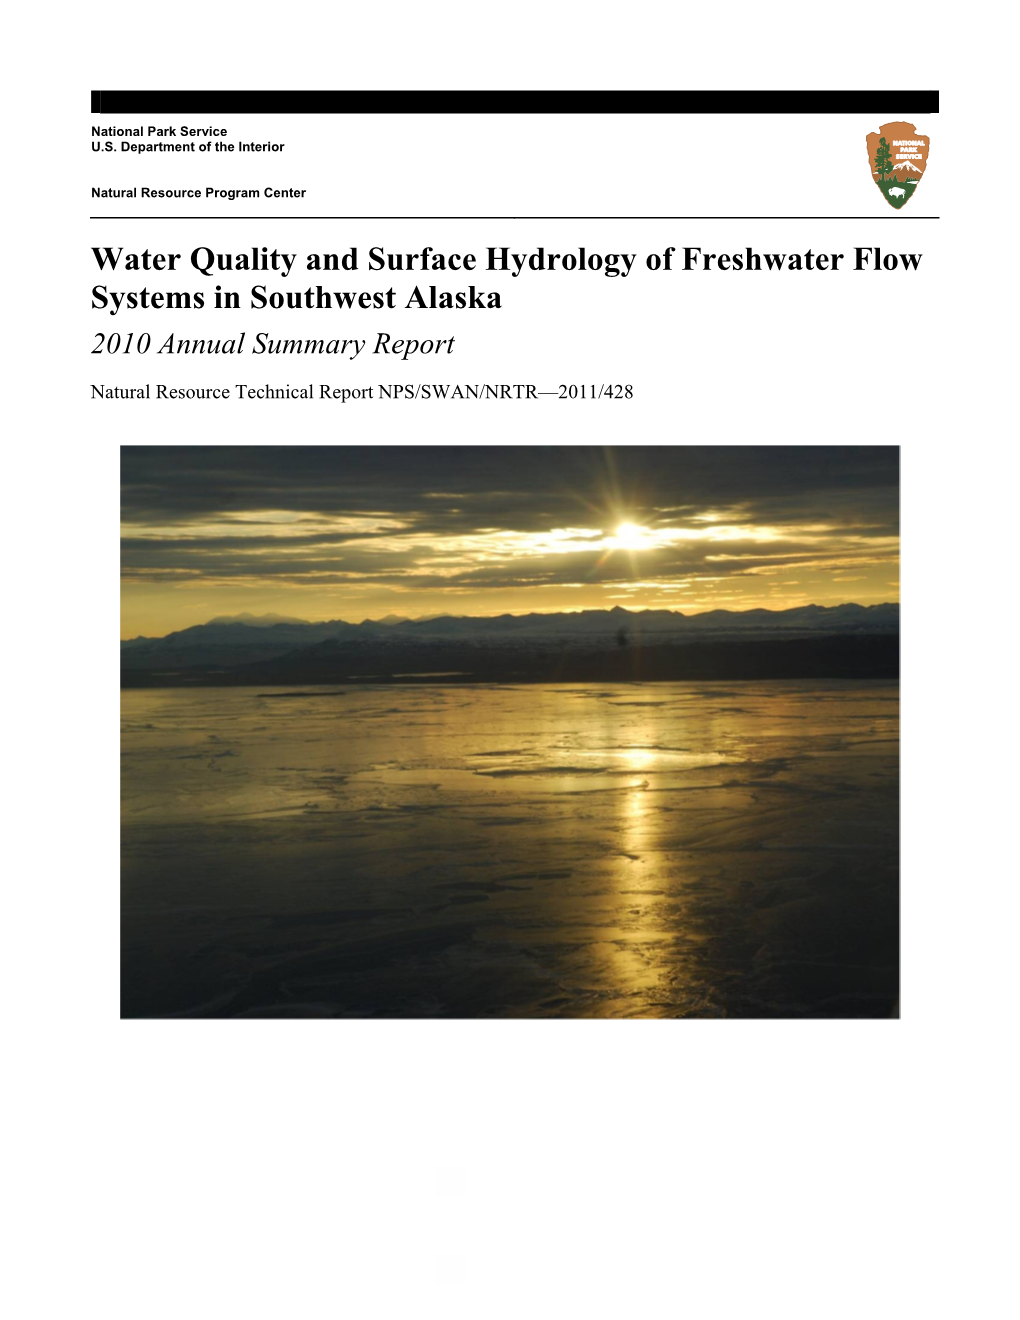 Water Quality and Surface Hydrology of Freshwater Flow Systems in Southwest Alaska 2010 Annual Summary Report